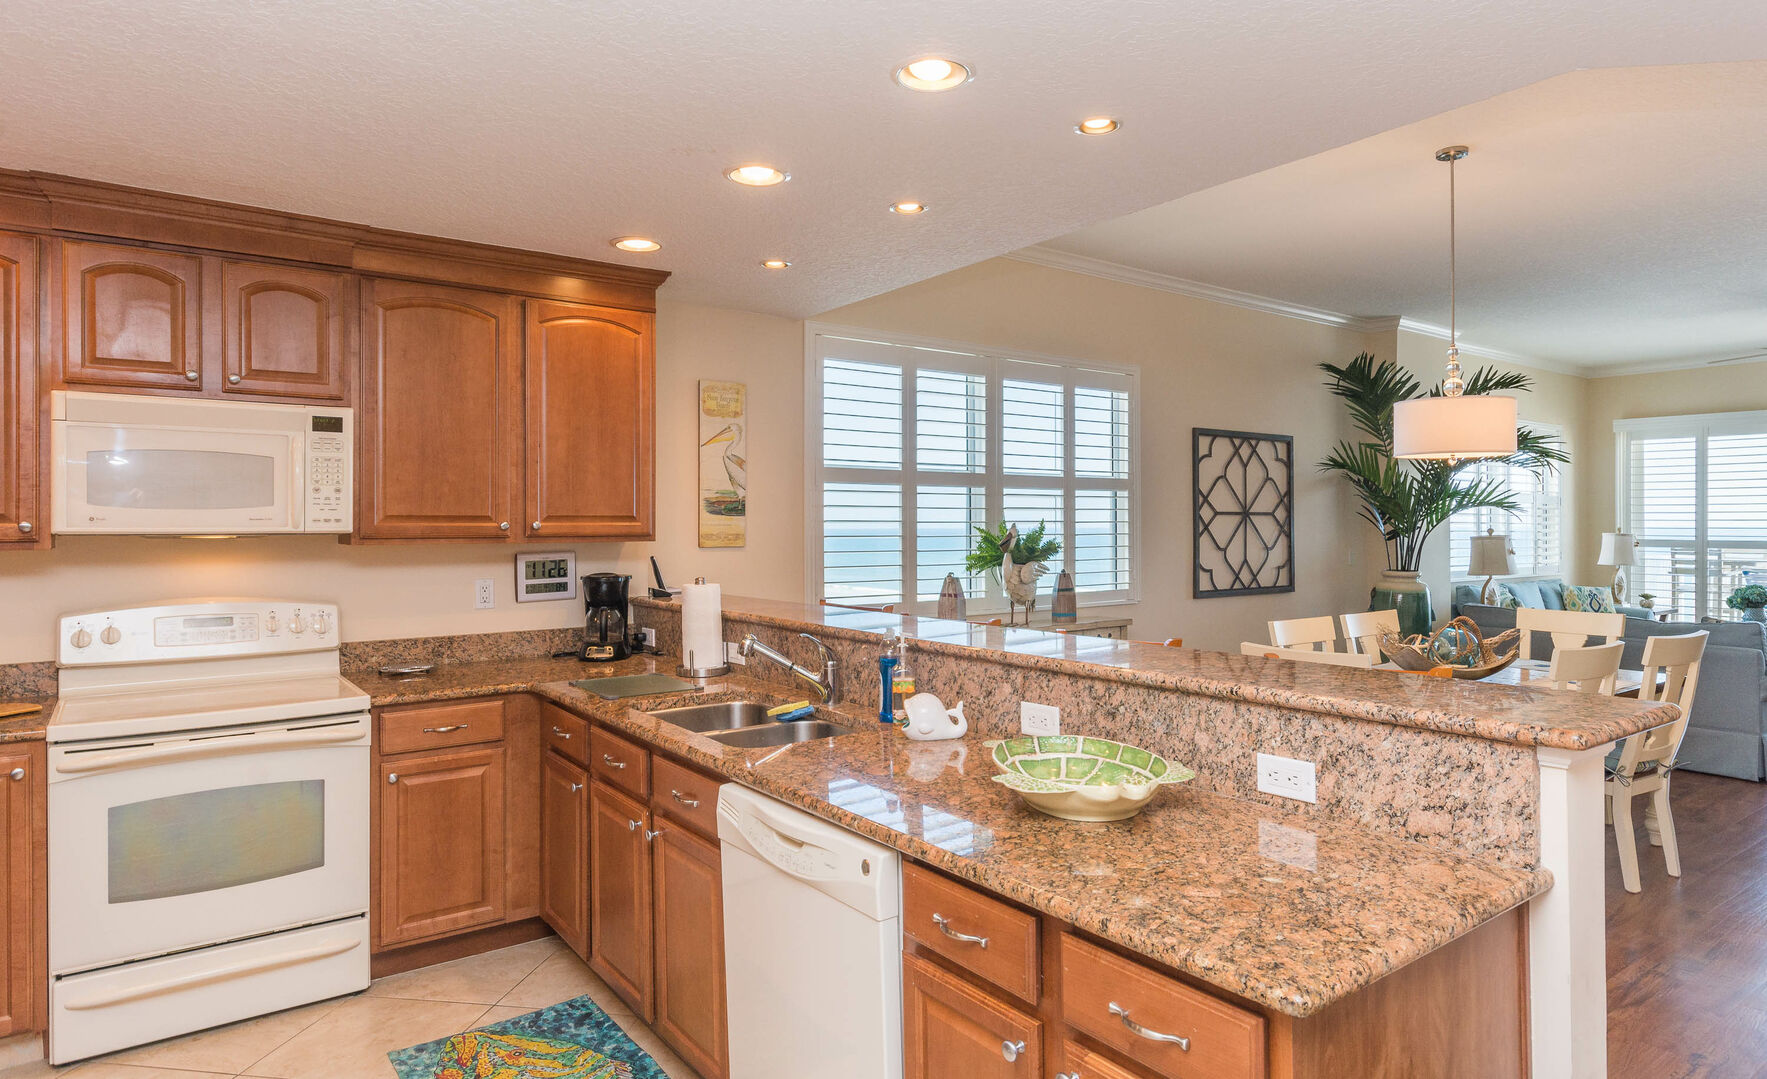 Ocean view, fully equipped kitchen